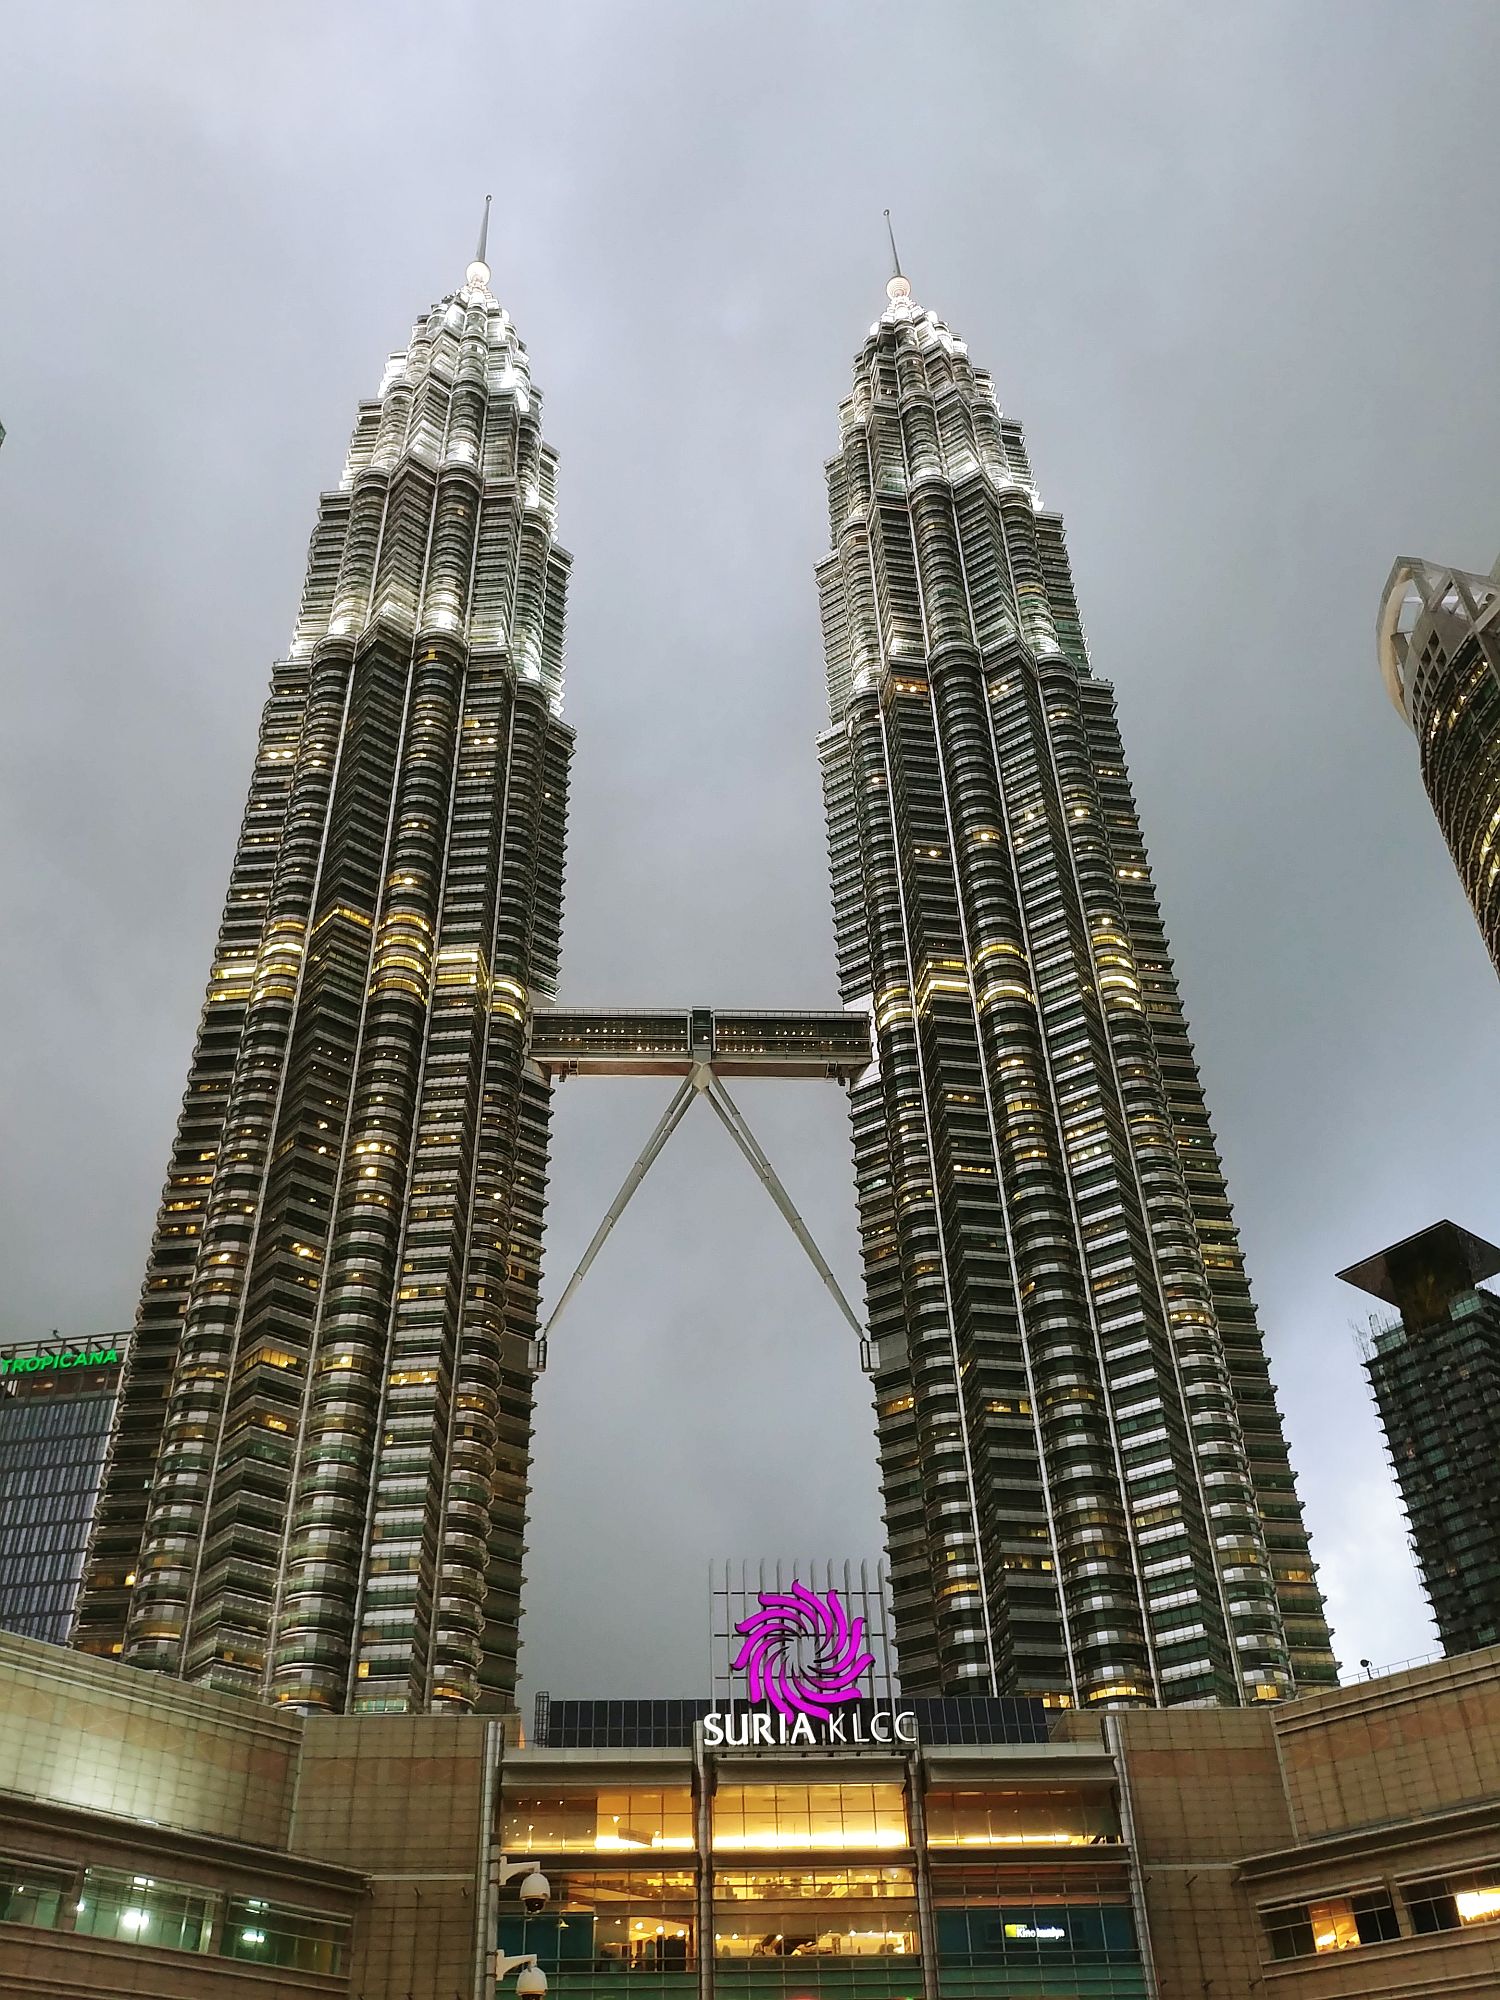 KL - Convention center - Petronas Twin Towers and dark clouds